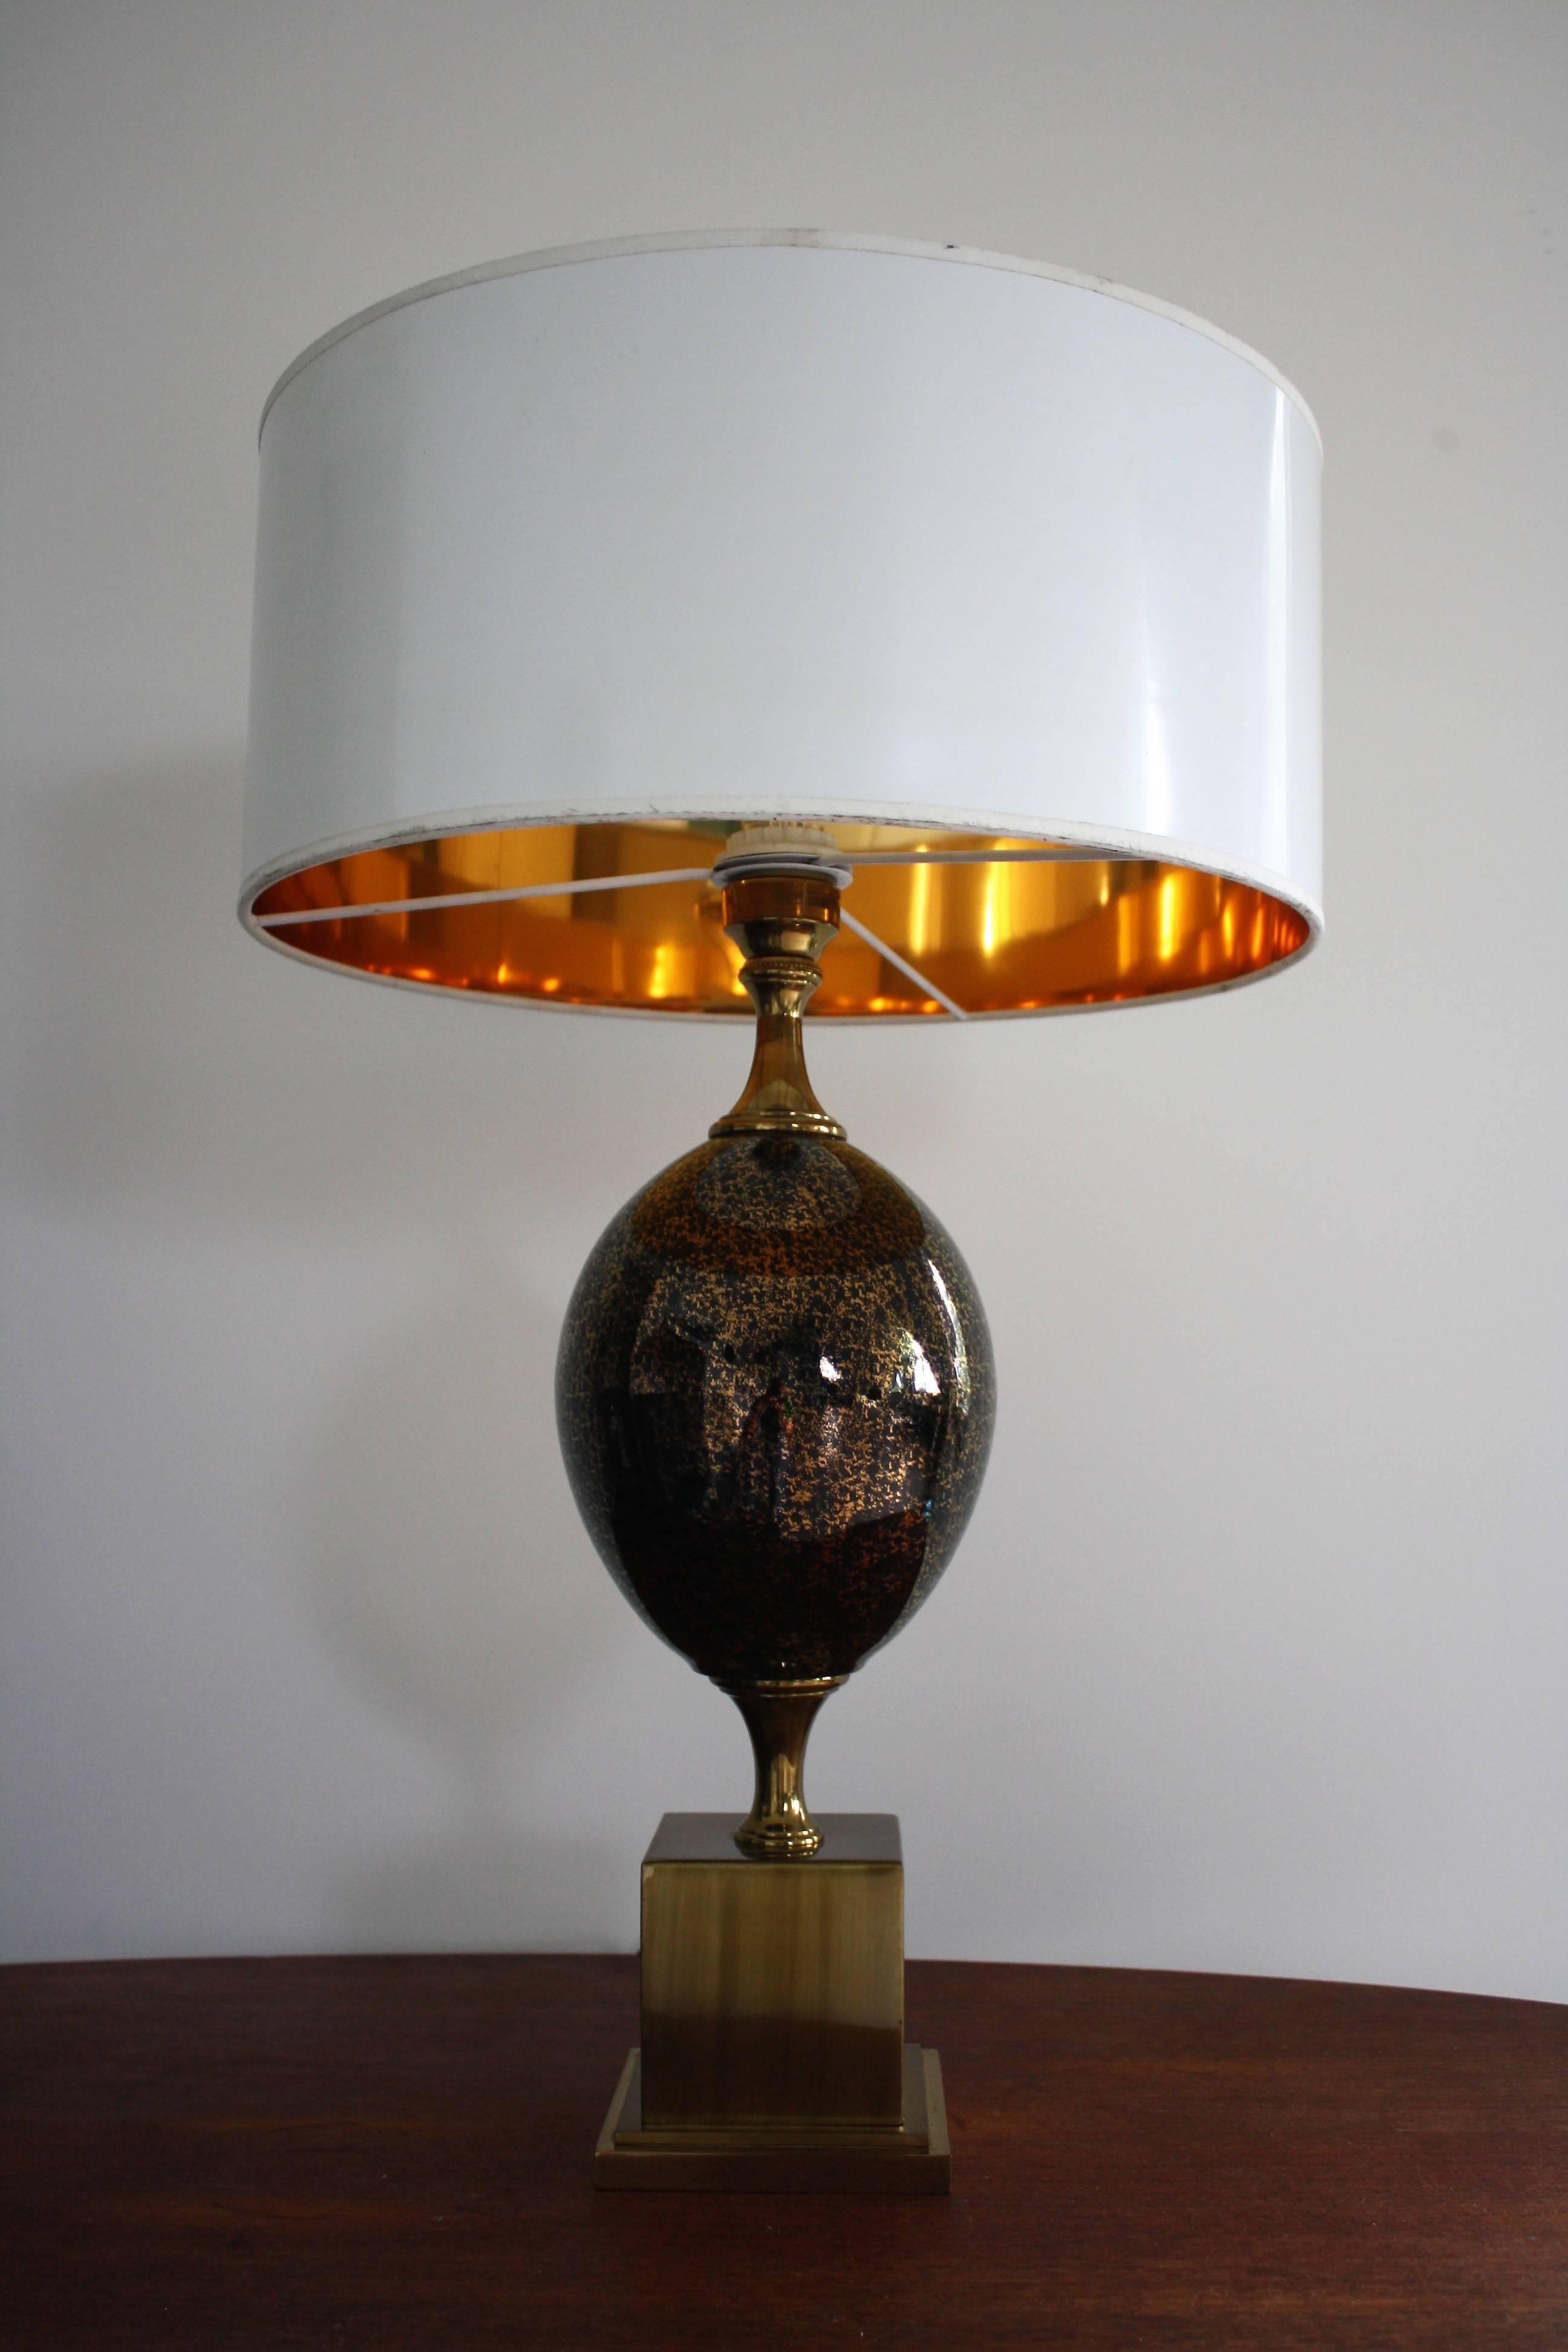 Brass egg table lamp by Maison Barbier

The egg has a lovely gold and black finish that comes to live when the light is on.

The lamp is delivered with a white shade with a golden interior to transmit warm cosy light.

A really stylish and